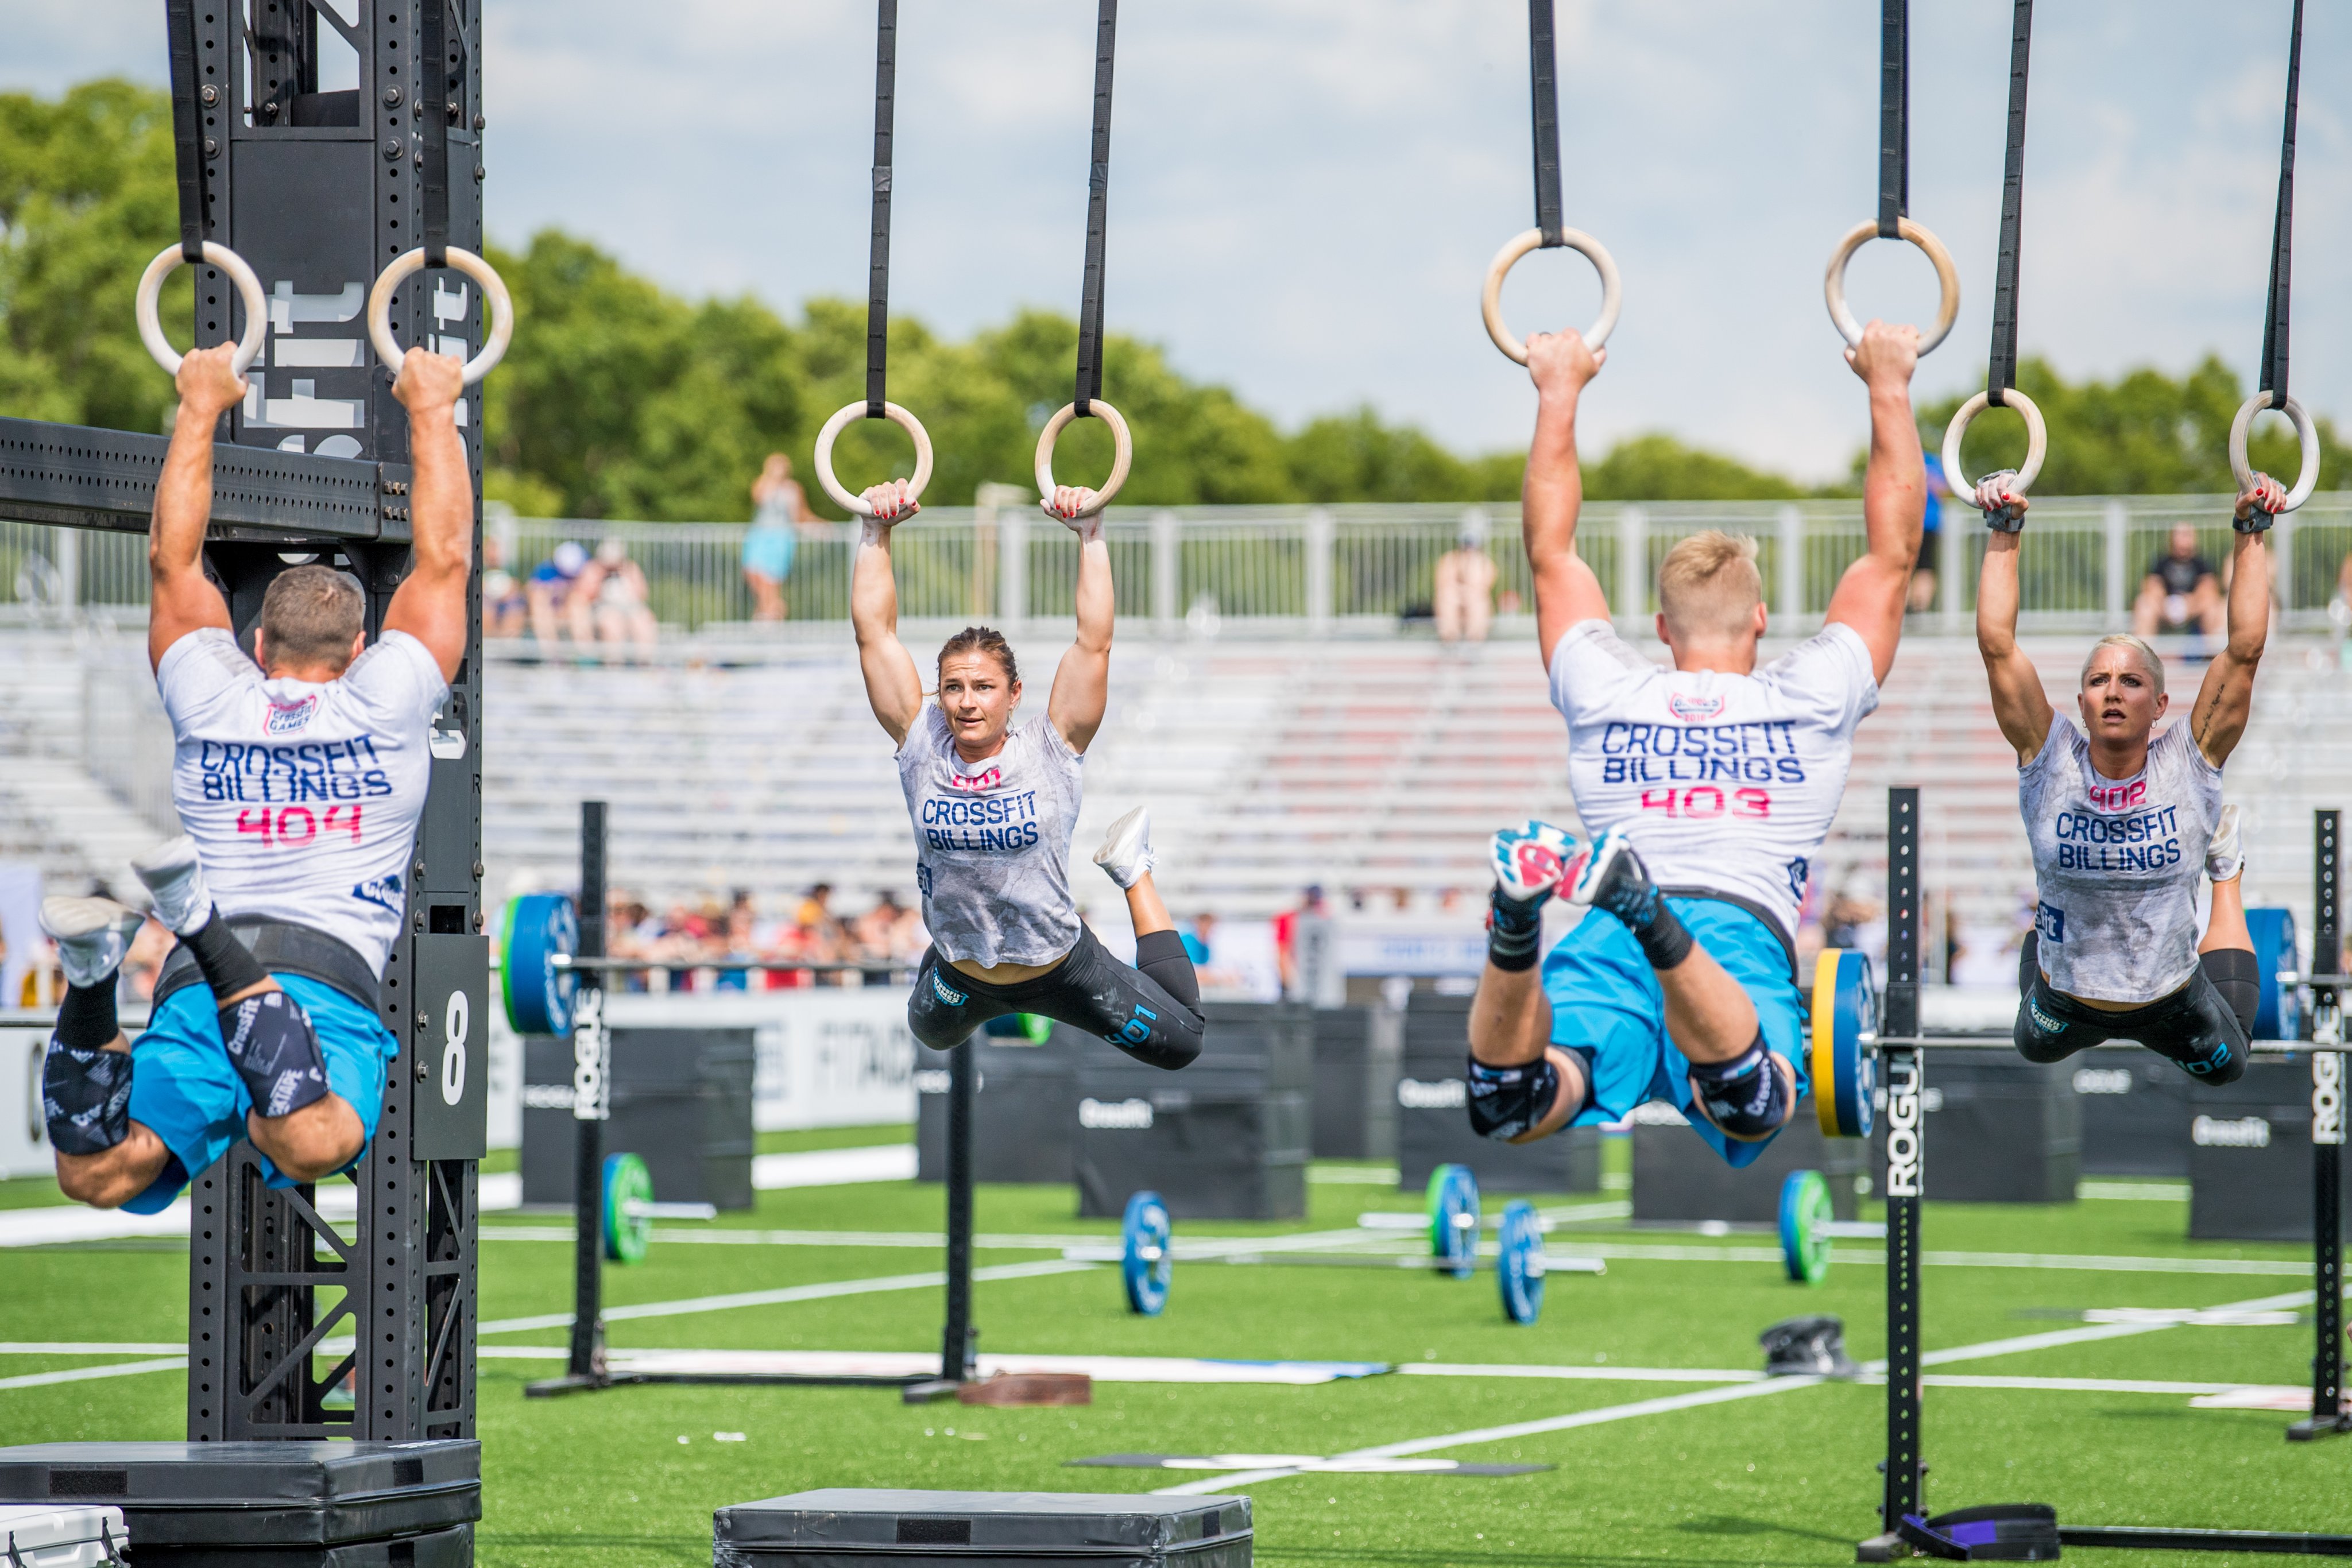 The CrossFit Games on Twitter: "The CrossFit Affiliate Pre-Sale for tickets to the 2019 Reebok CrossFit Games is live. Affiliates with 12 or more in the receive early access to